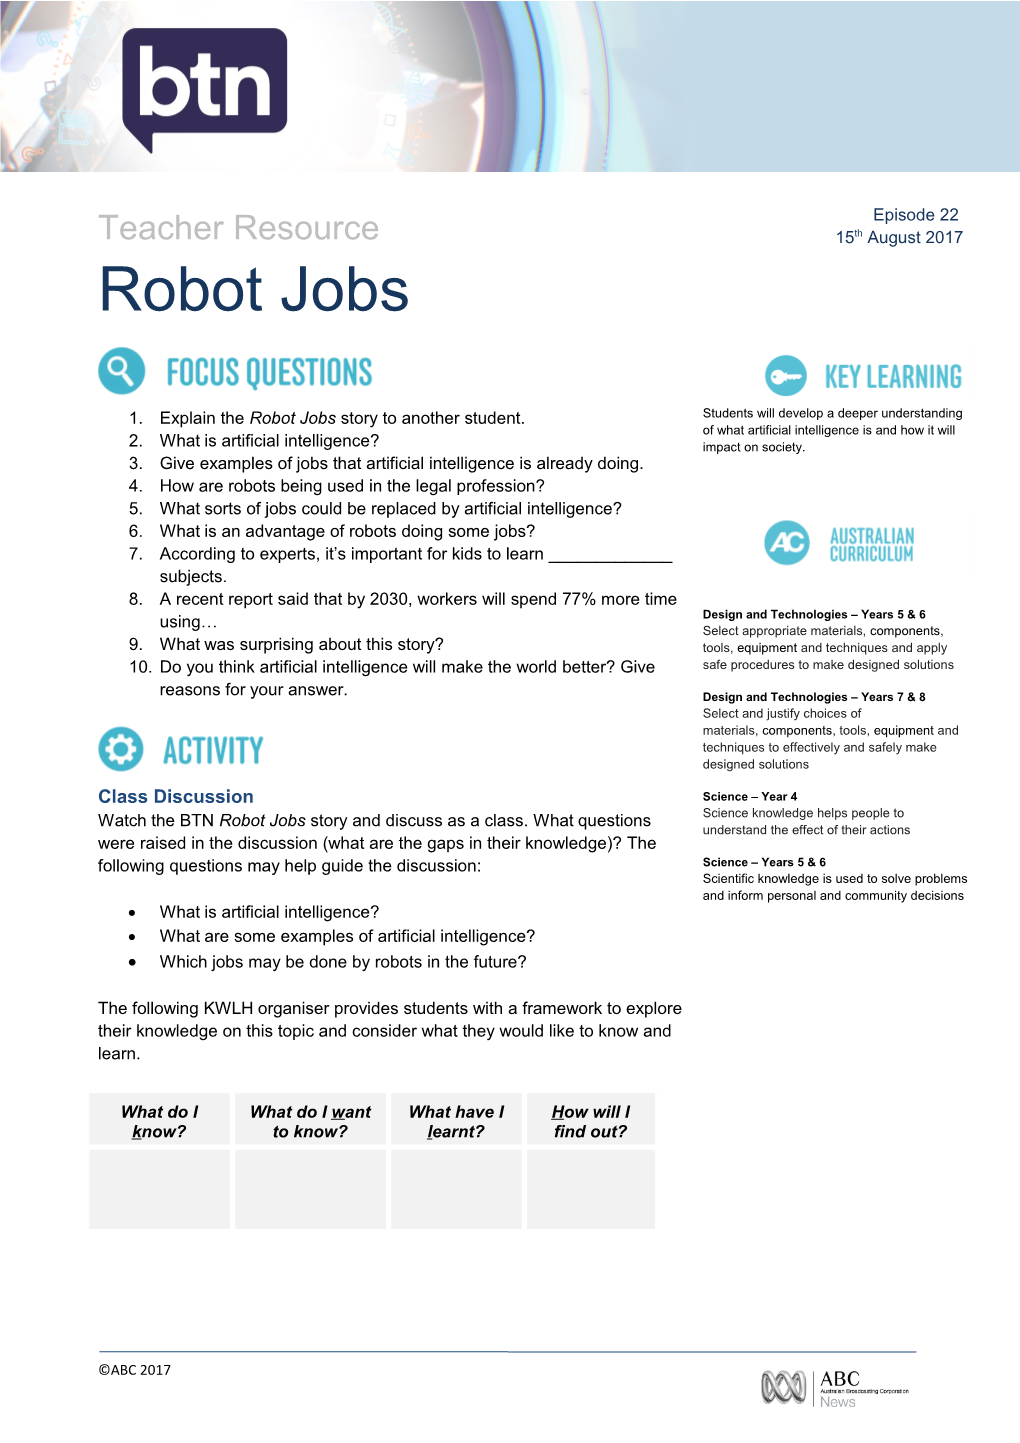 Explain the Robot Jobs Story to Another Student